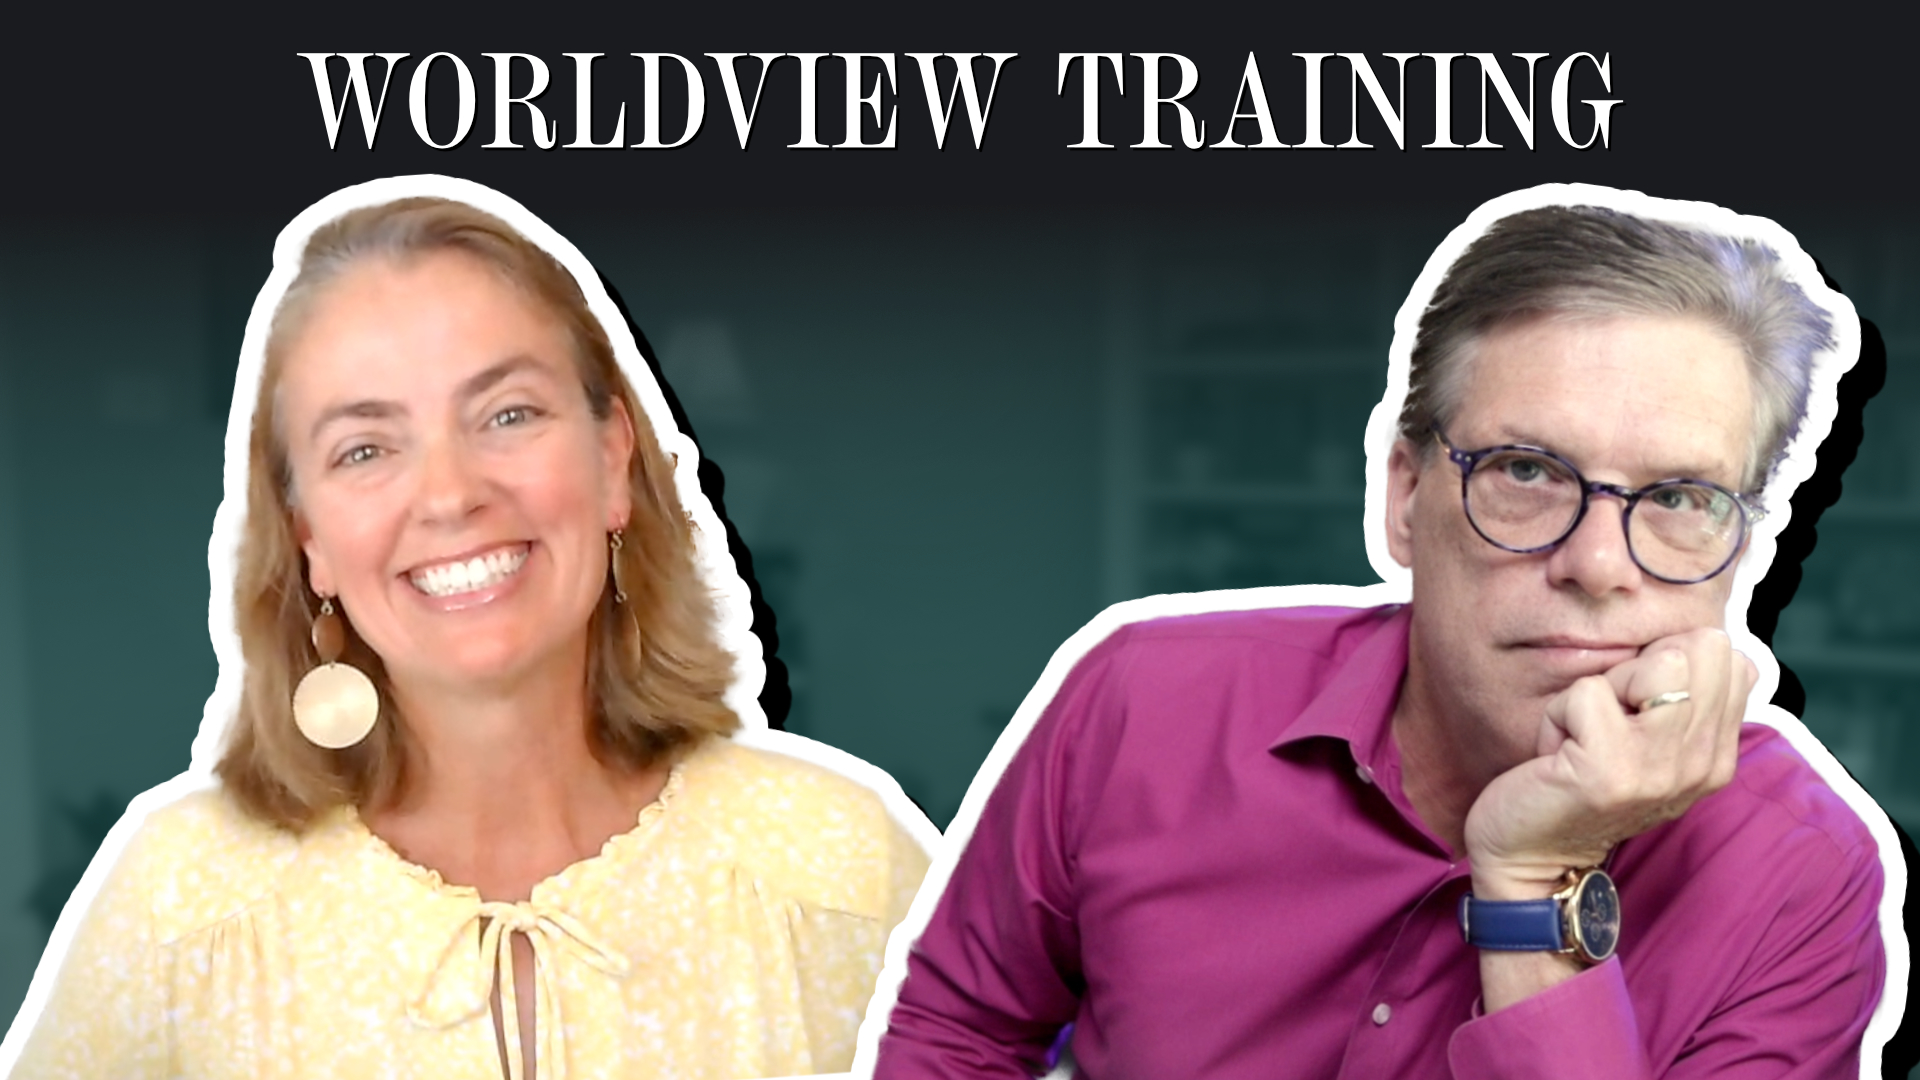 Worldview Training is Important